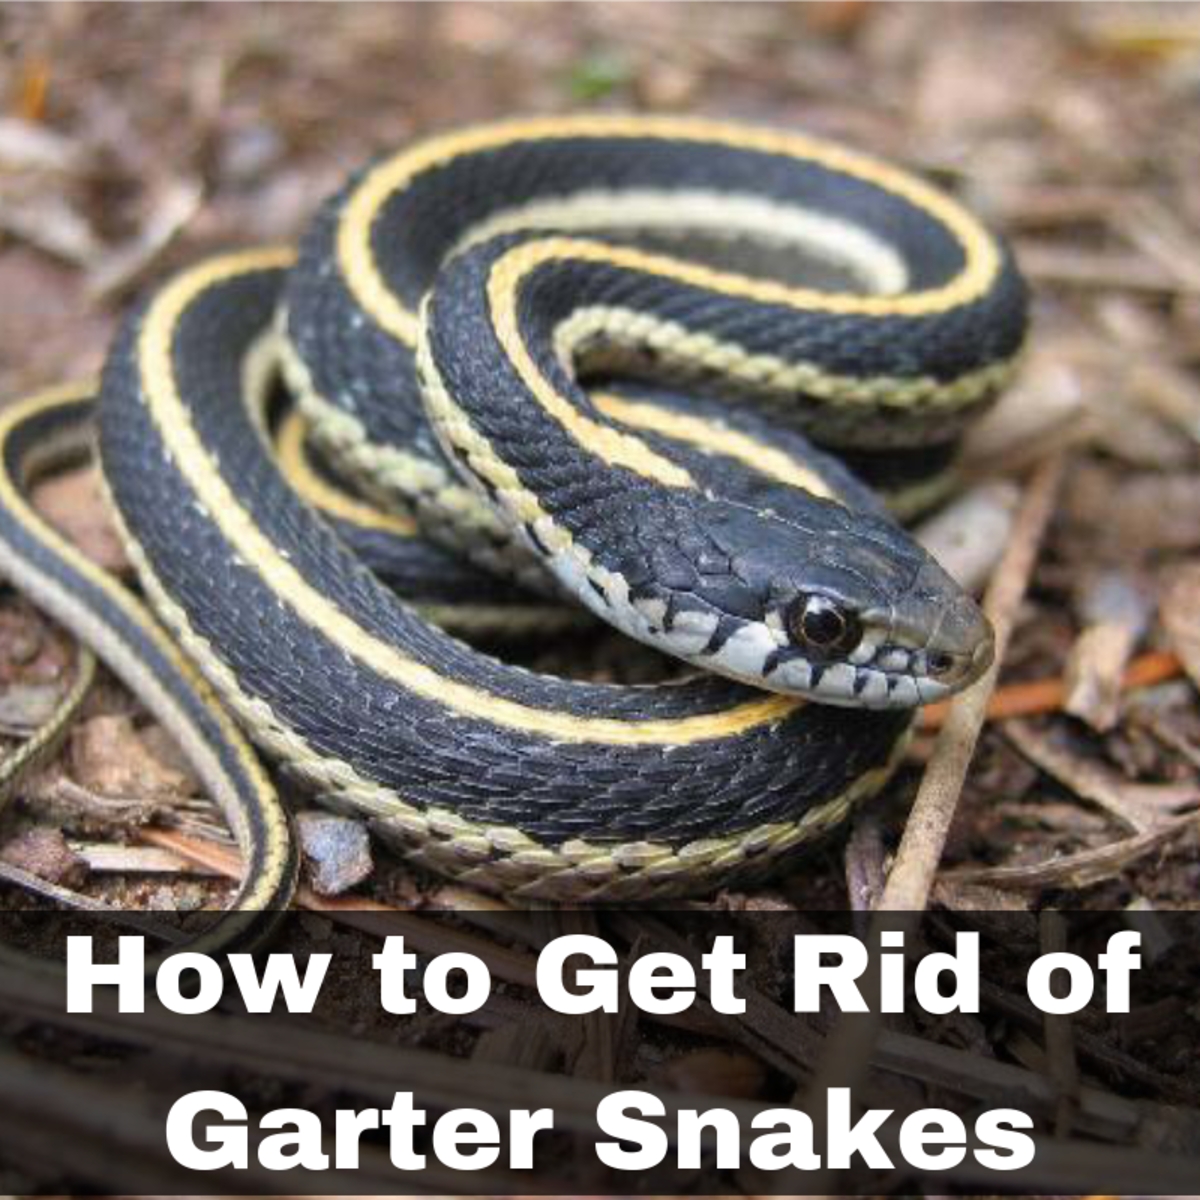 How To Get Rid Of Garter Snakes Without Killing Them 7 Tried And